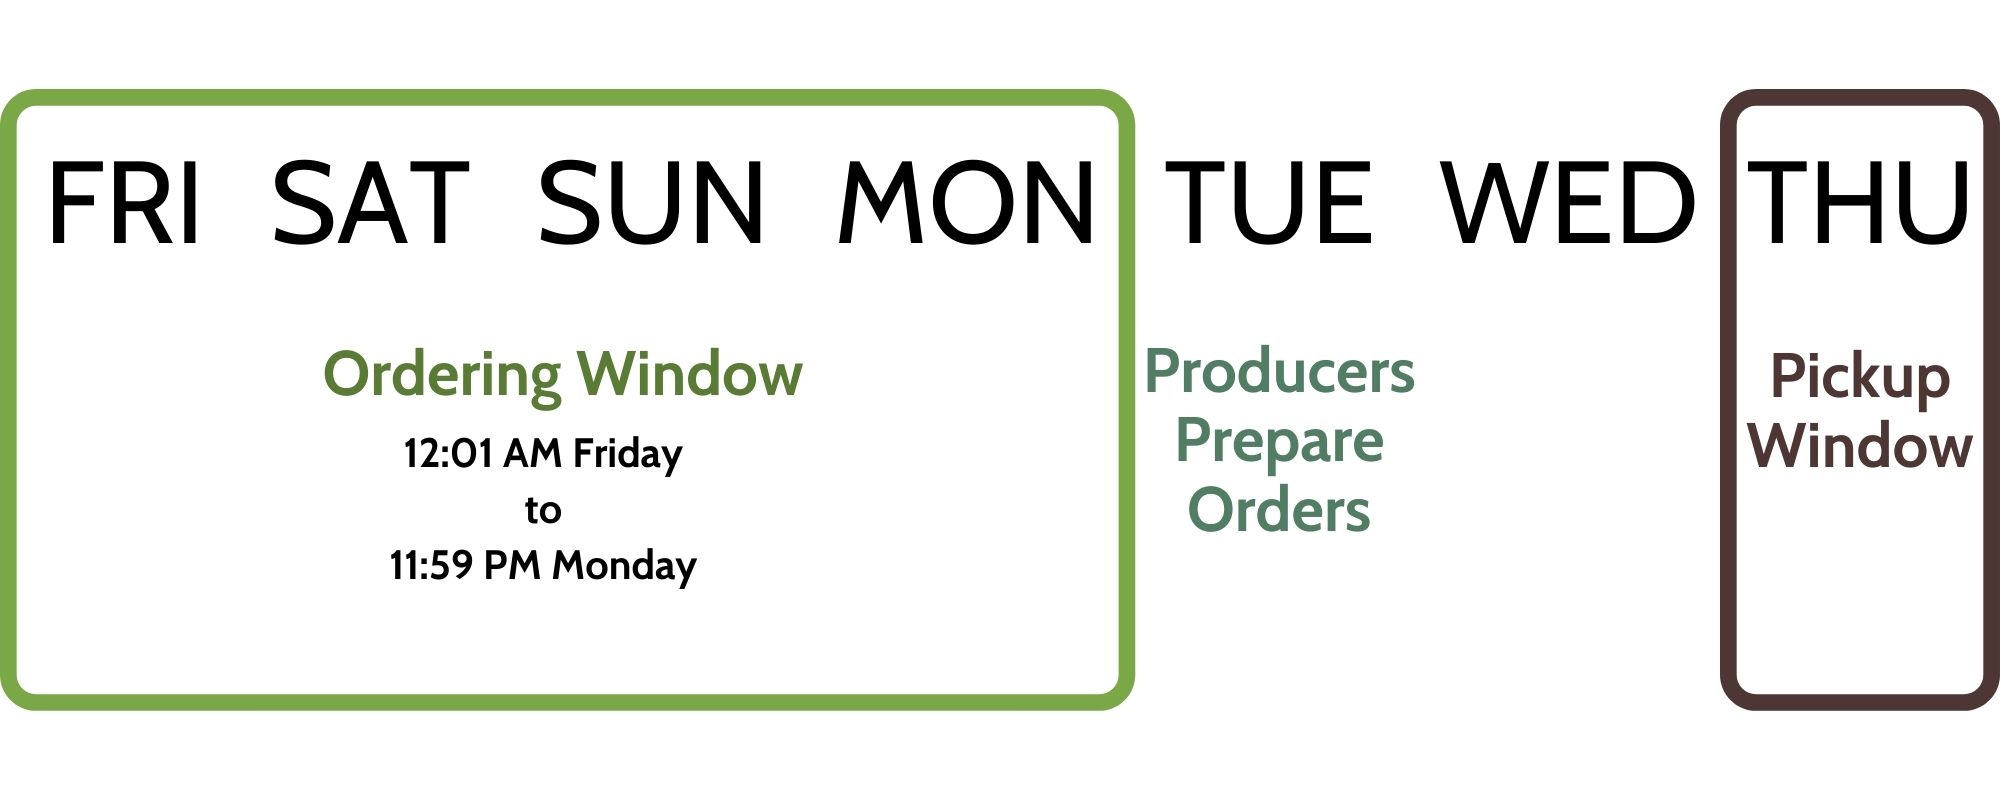 Infographic describing the weekly schedule. Friday through Monday is the ordering window. On Tuesday the producers prepare orders. Thursday is the pickup window.